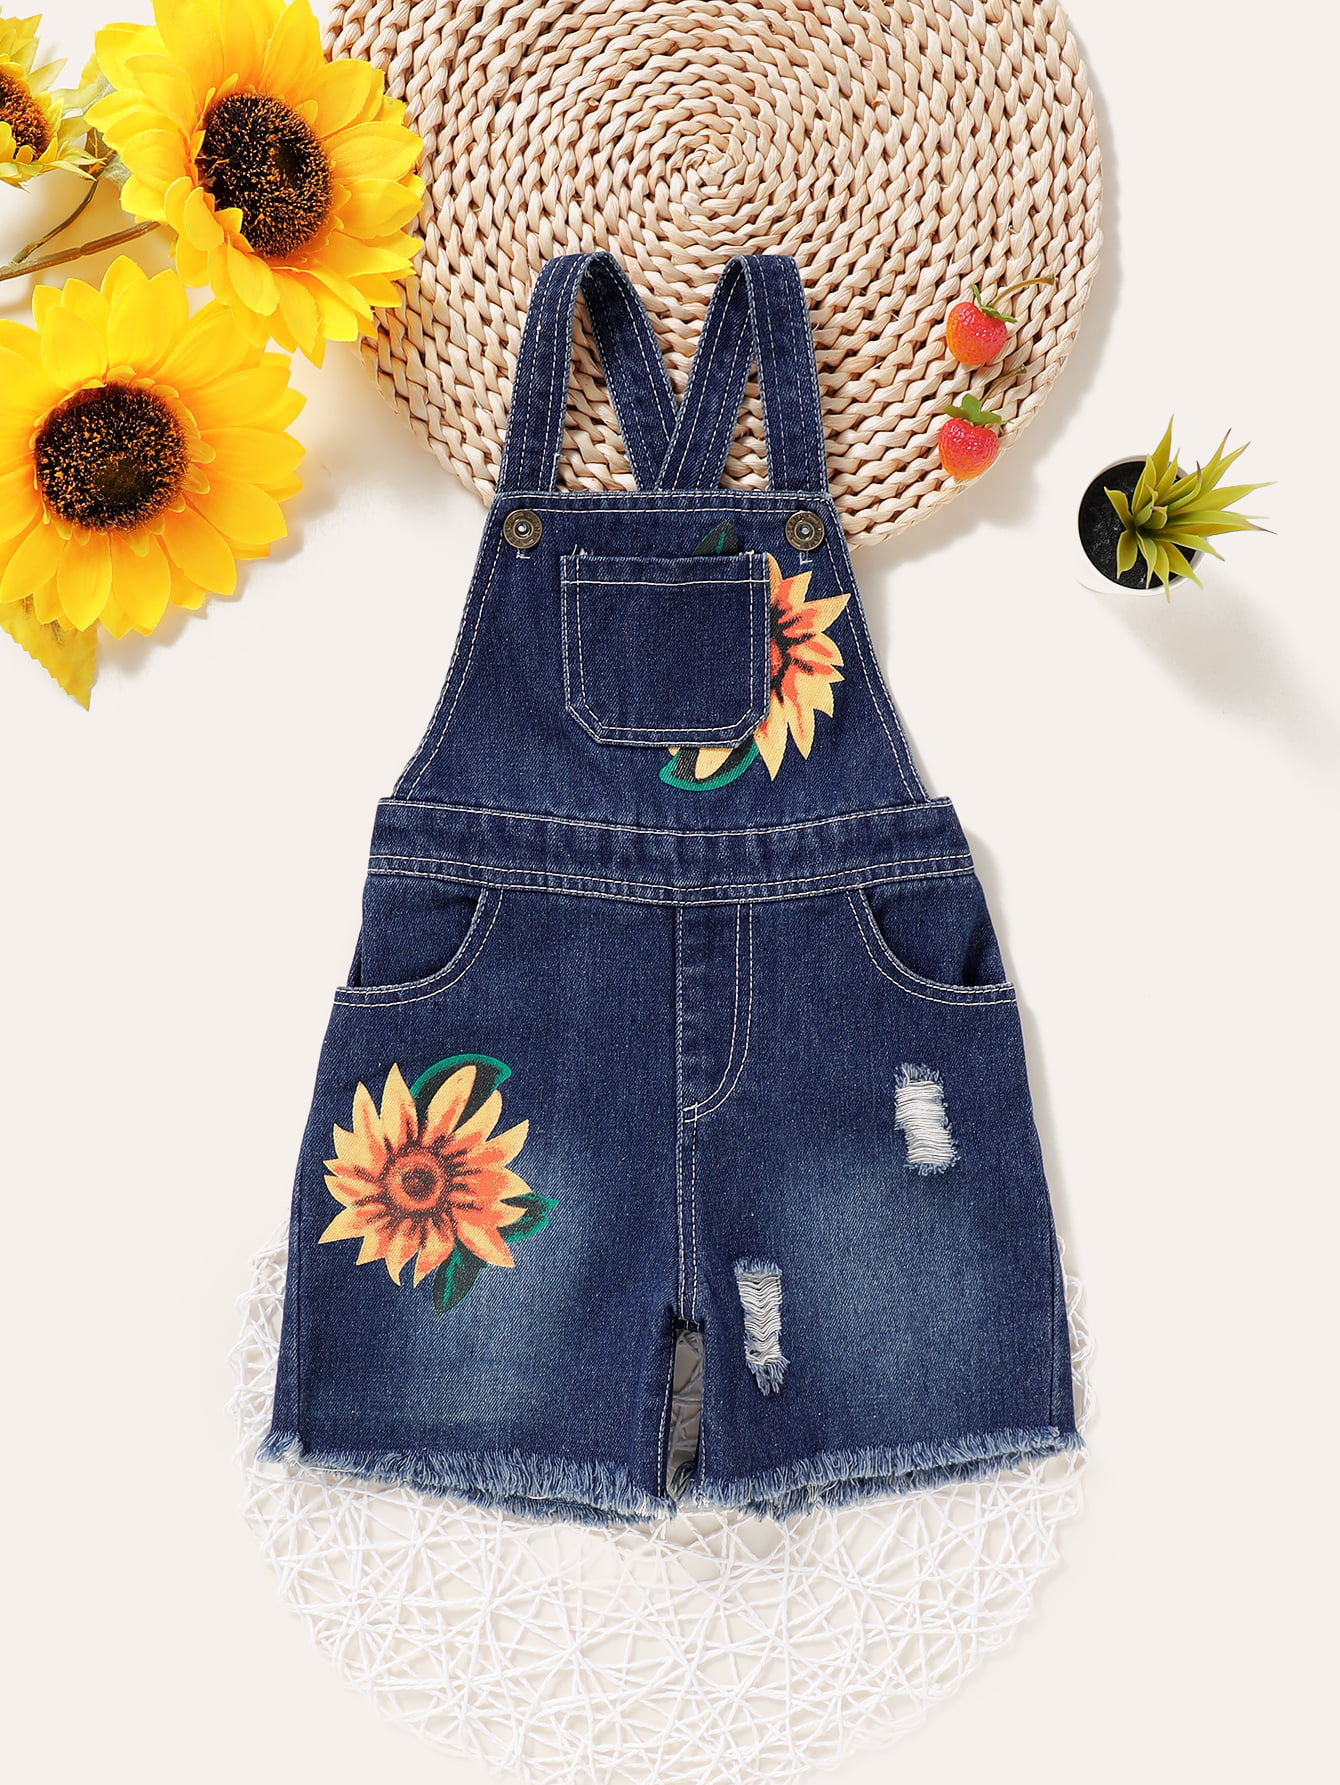 Baby Toddler Girls Clothes Denim Overalls Ripped Holes Suspender Jeans Pants Sunflower Summer Fall Outfits 